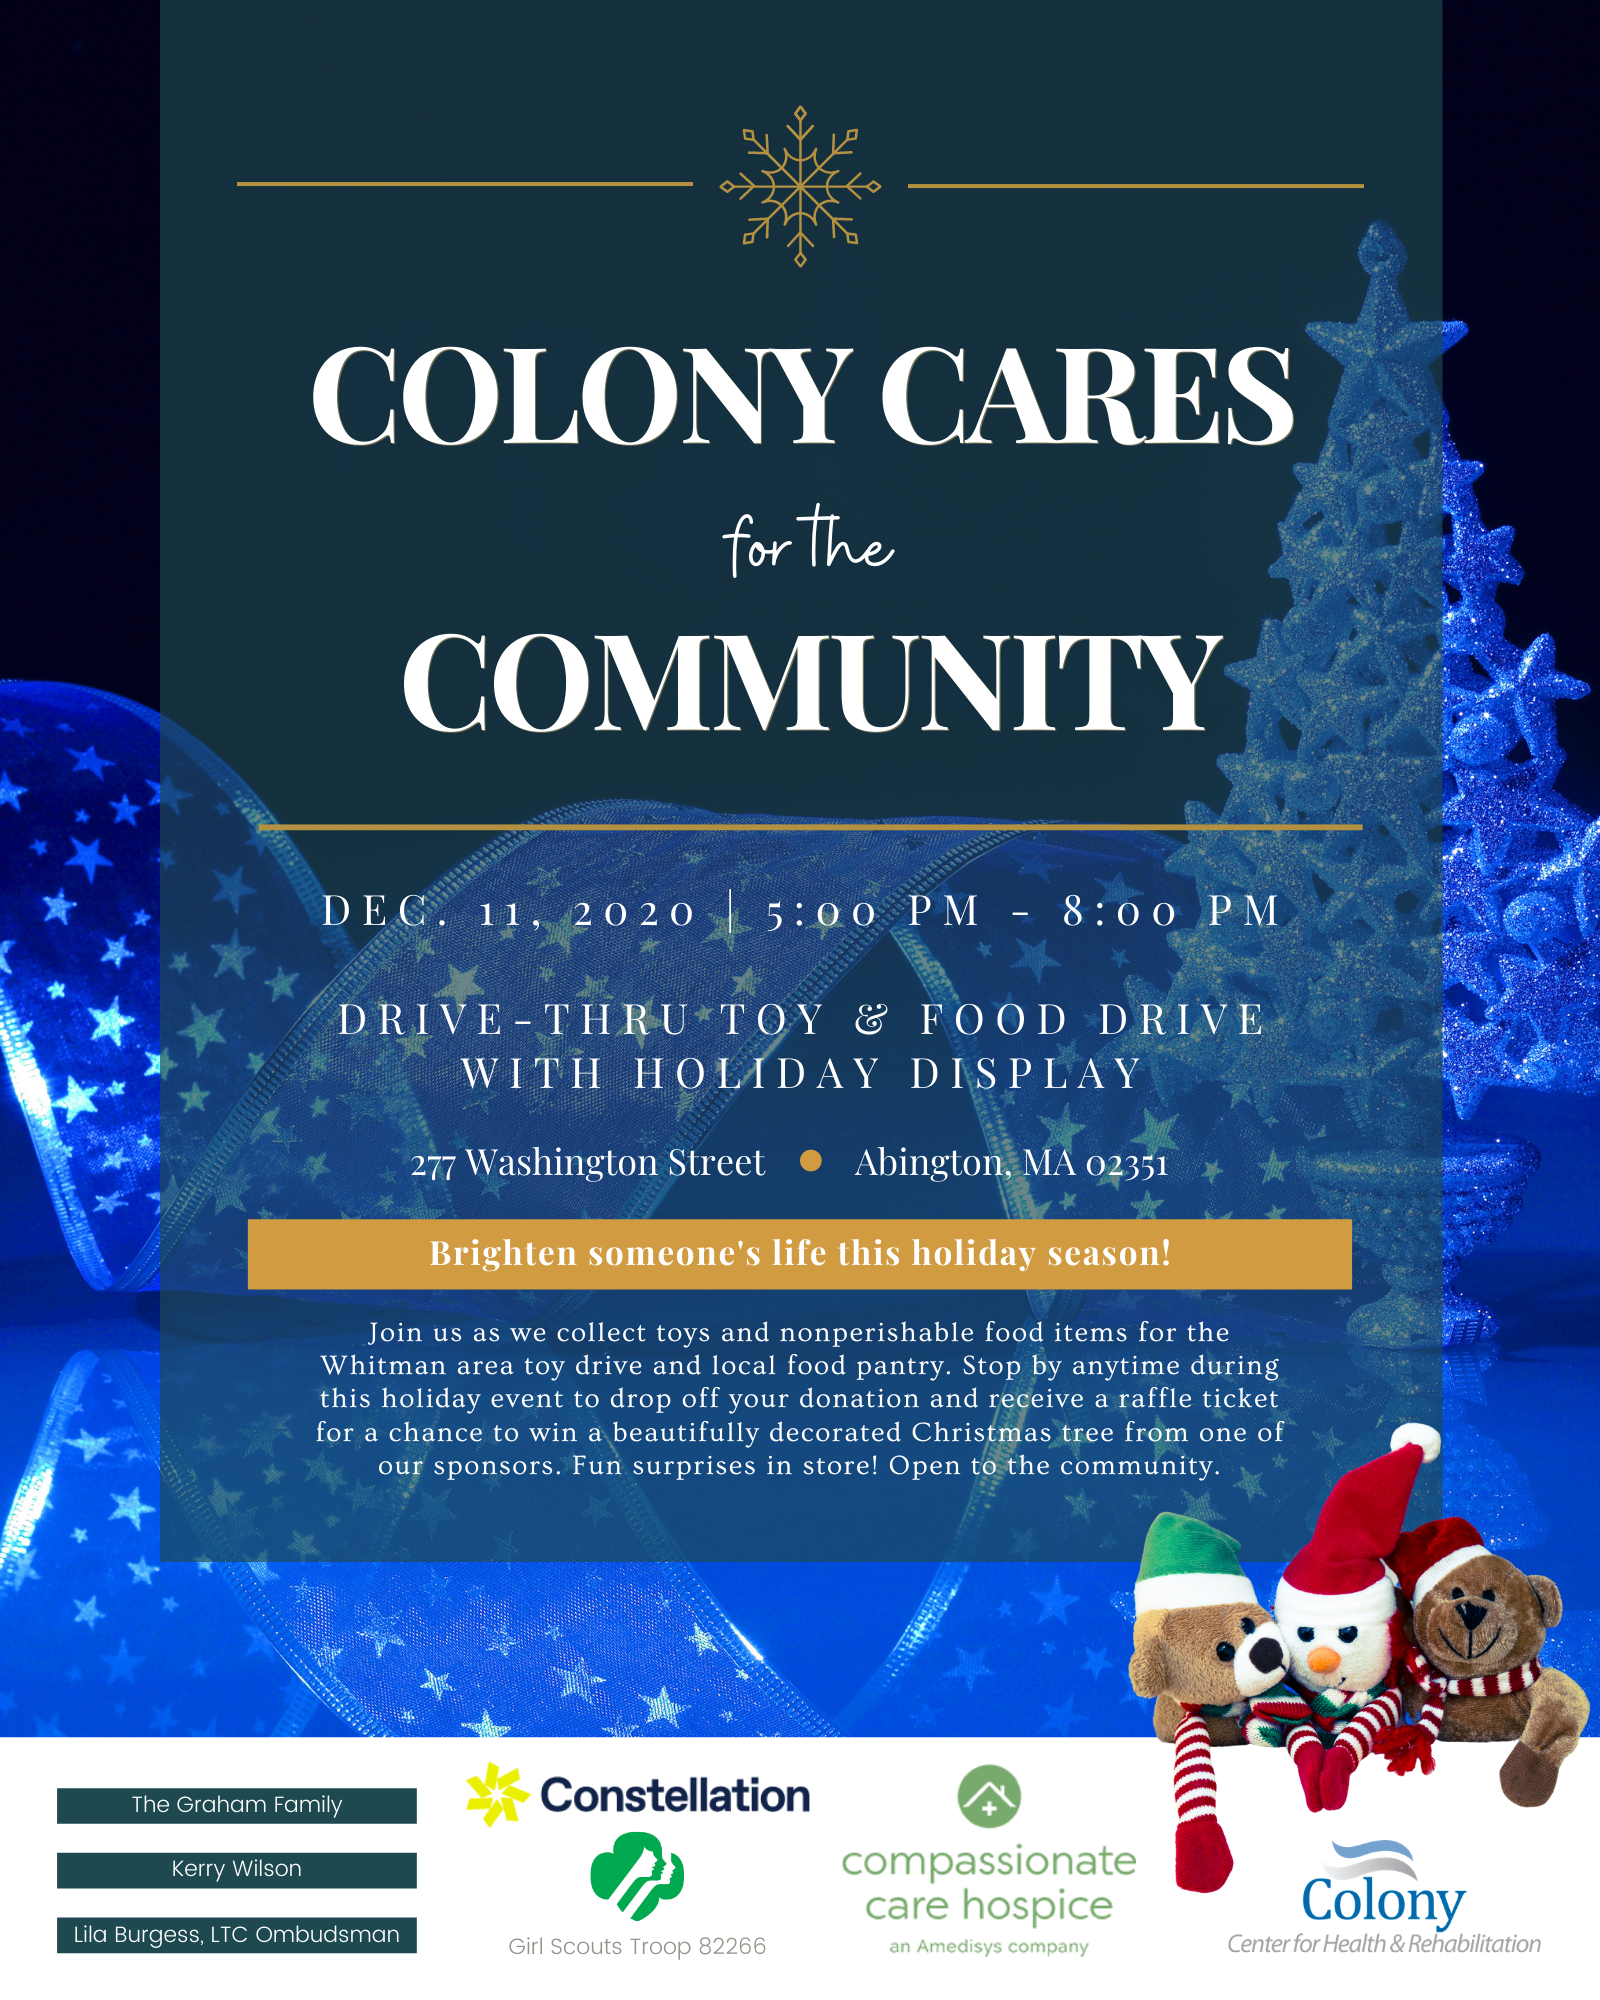 Colony Cares for the Community Drive-Thru Toy & Food Drive